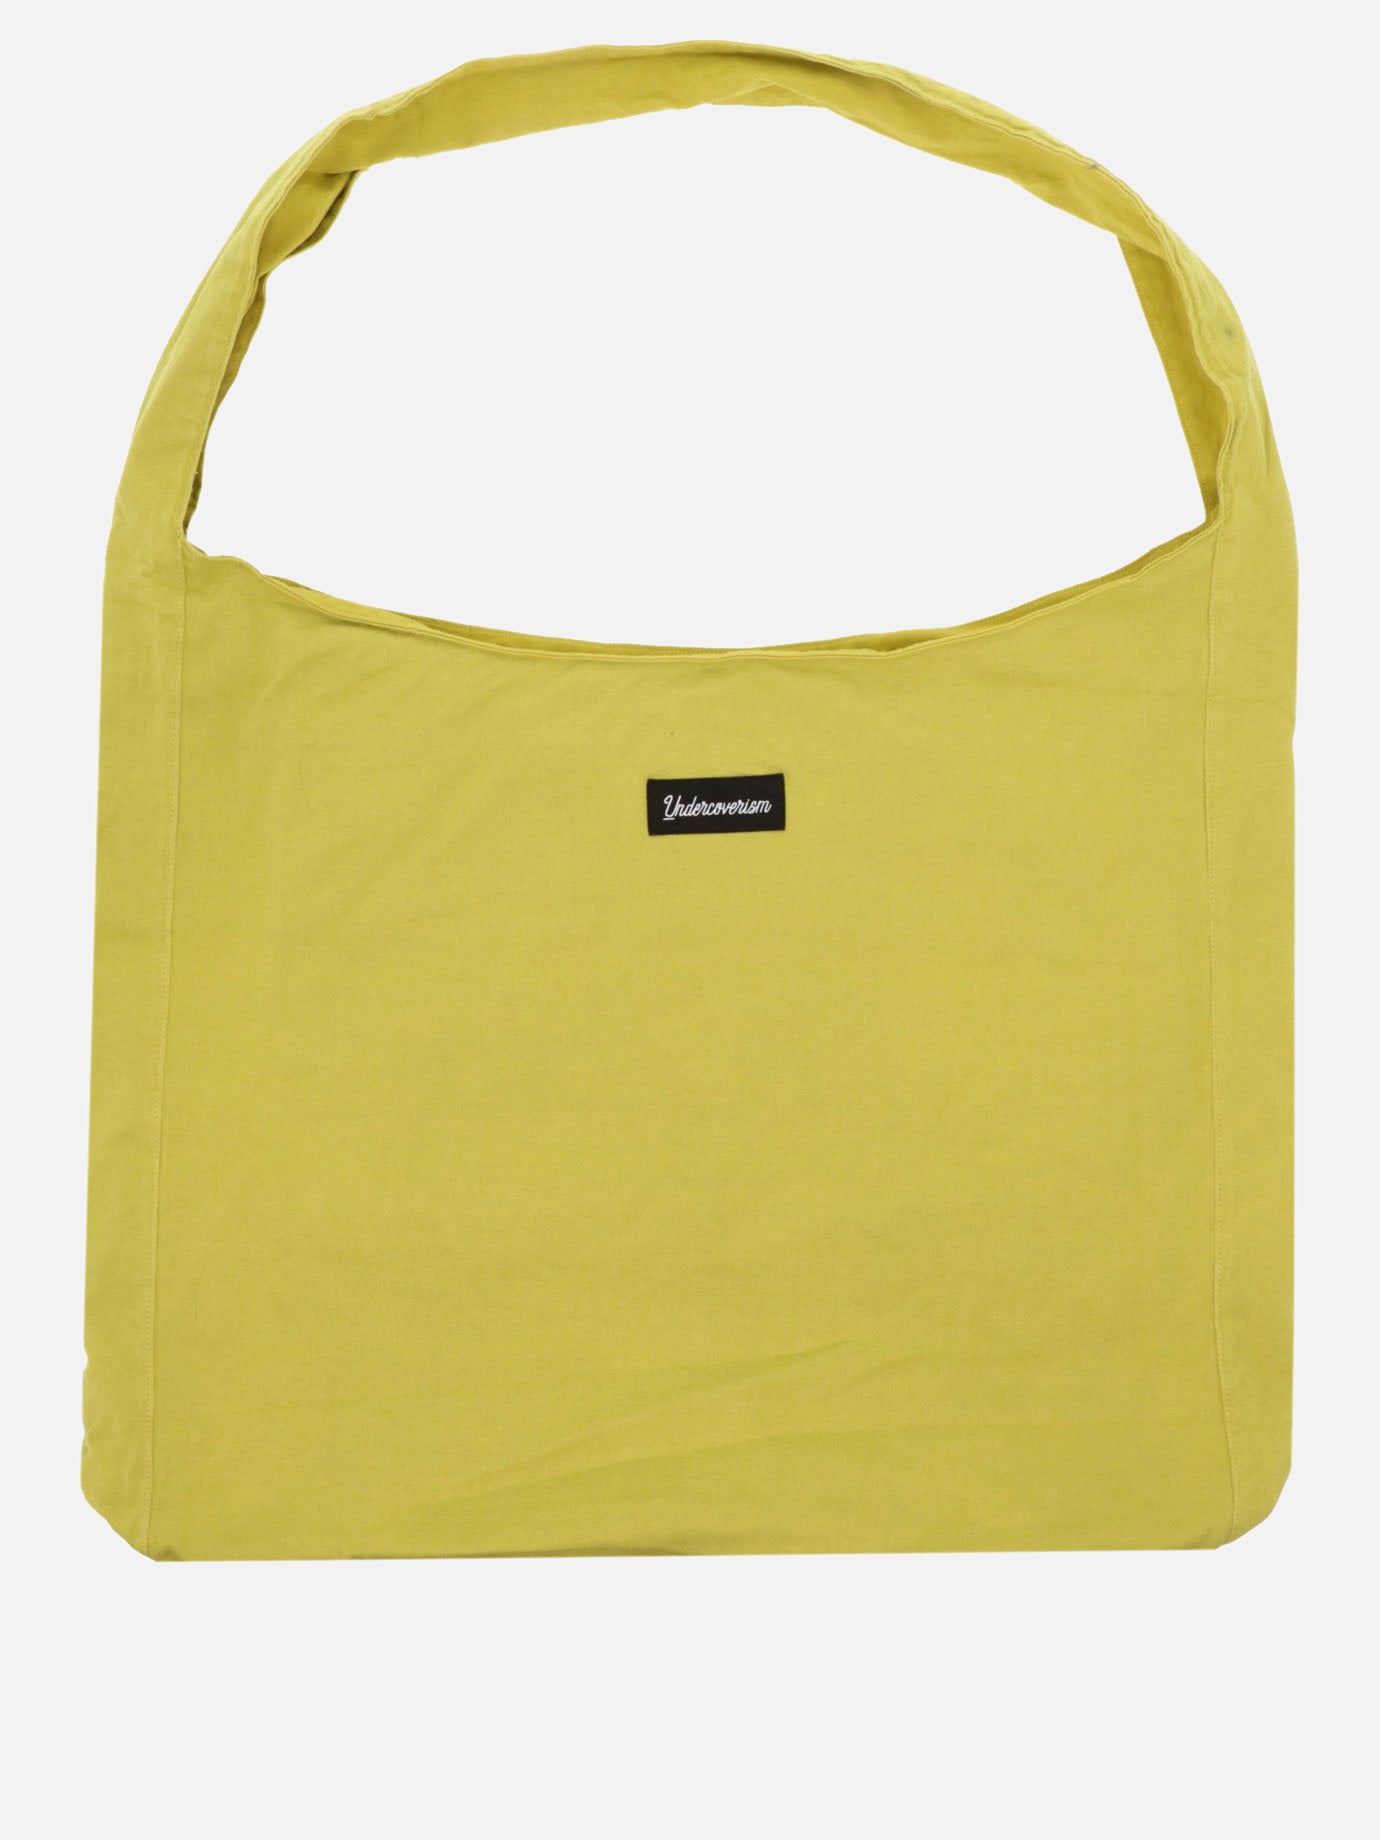 "Undercover" tote bag